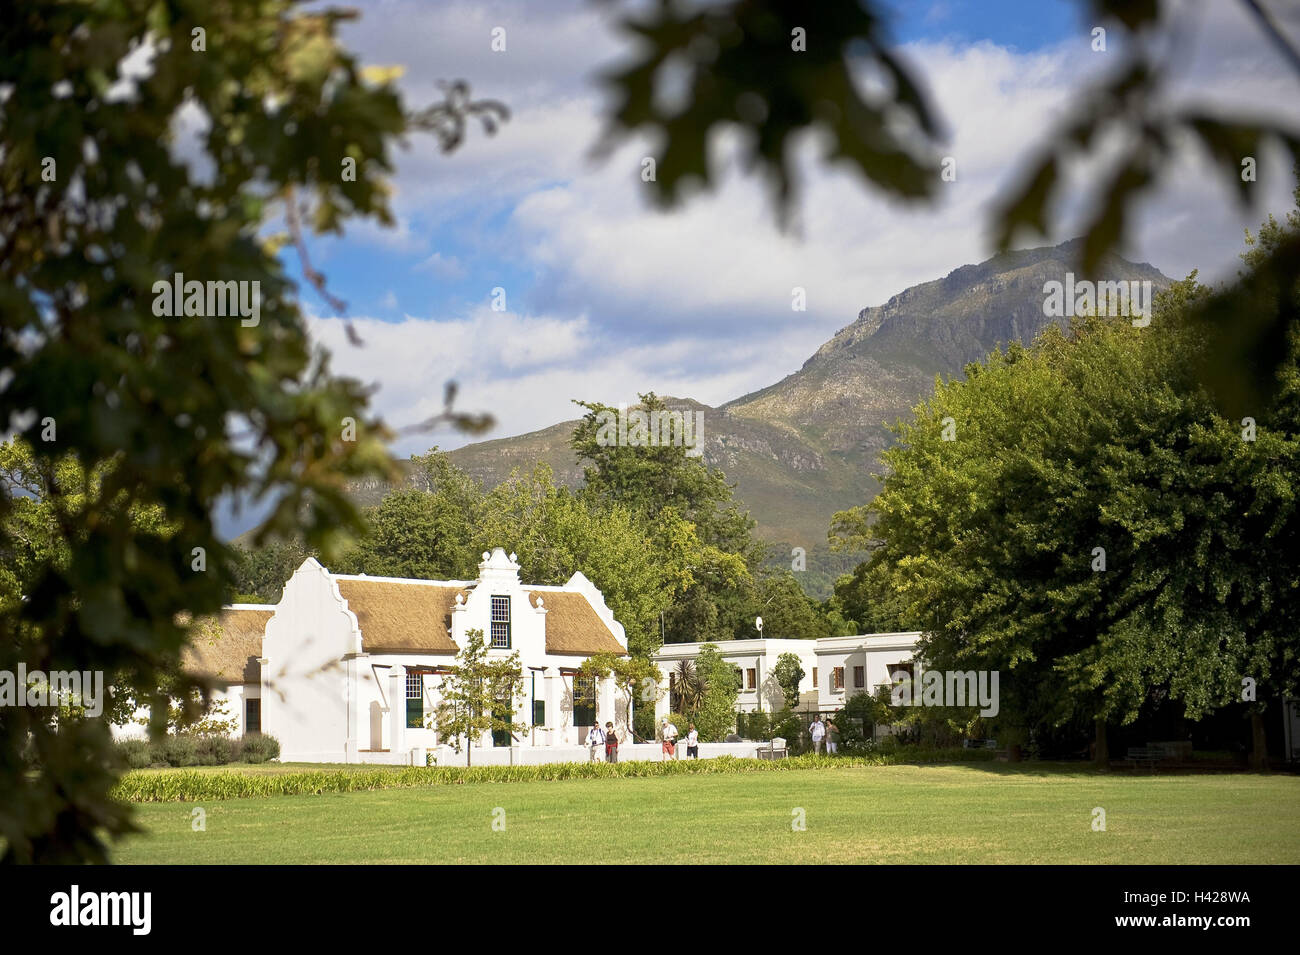 South, Africa, west cape, Stellenbosch, Country lodge, Guest House, park, mountain, cloudy sky, town, town view, building, houses, Victorian, historically, architecture, colonial style, hotel business, boarding house, guest house, guesthouse, accomodation, overnight stay, Winelands, wine-growing area, meadow, trees, outside, people, guests, Africa, Stock Photo